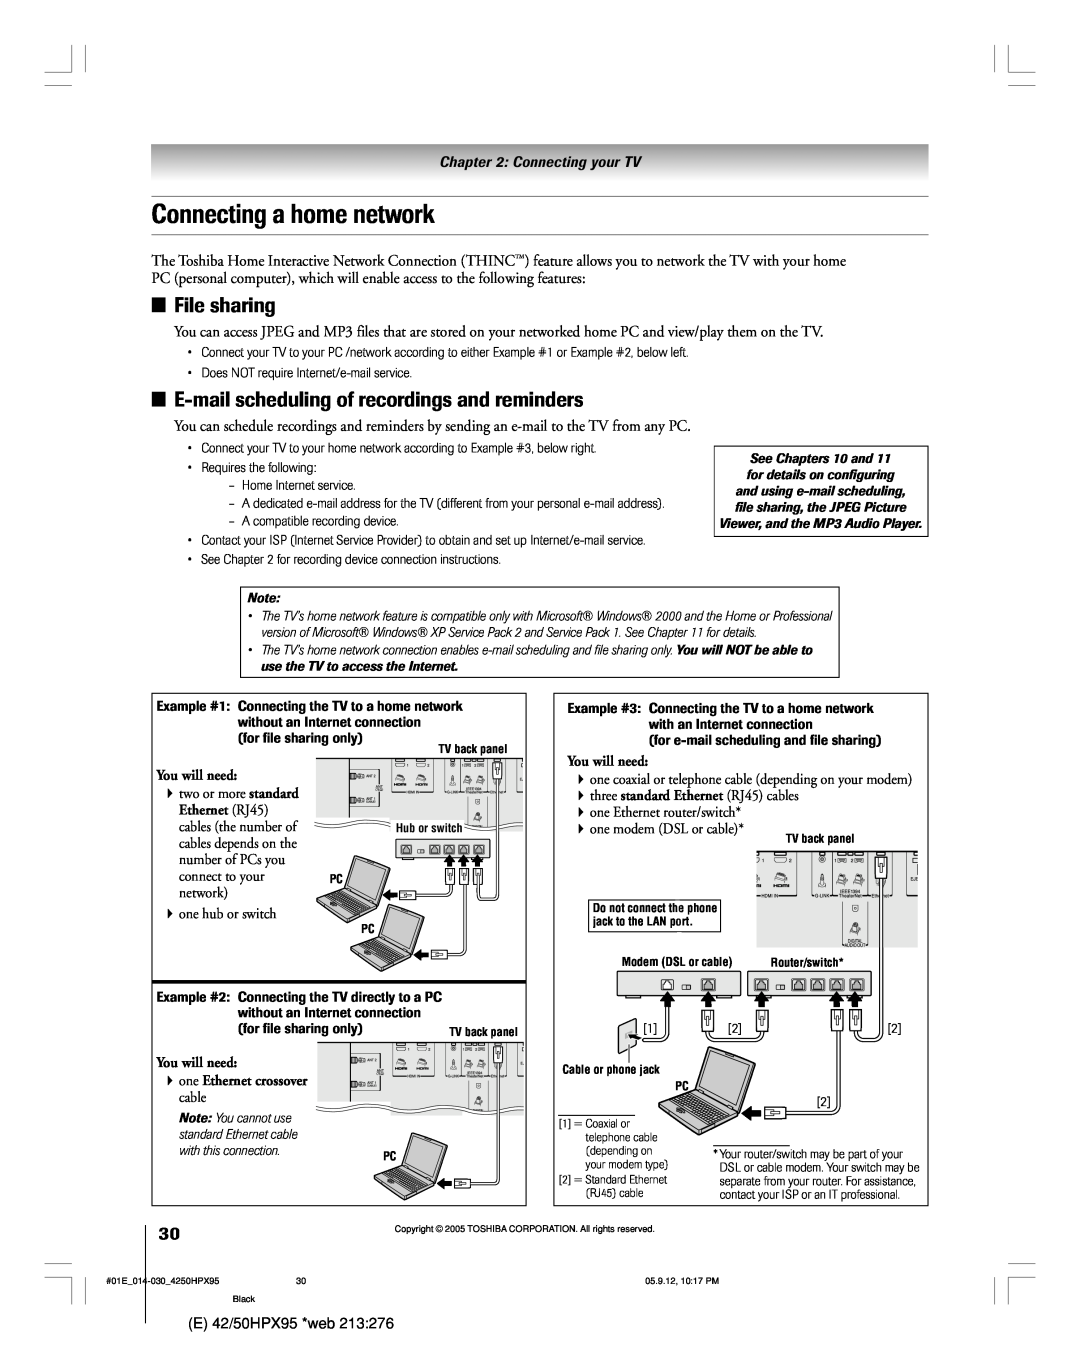 Toshiba 42HPX95 owner manual Connecting a home network, File sharing, E-mail scheduling of recordings and reminders 